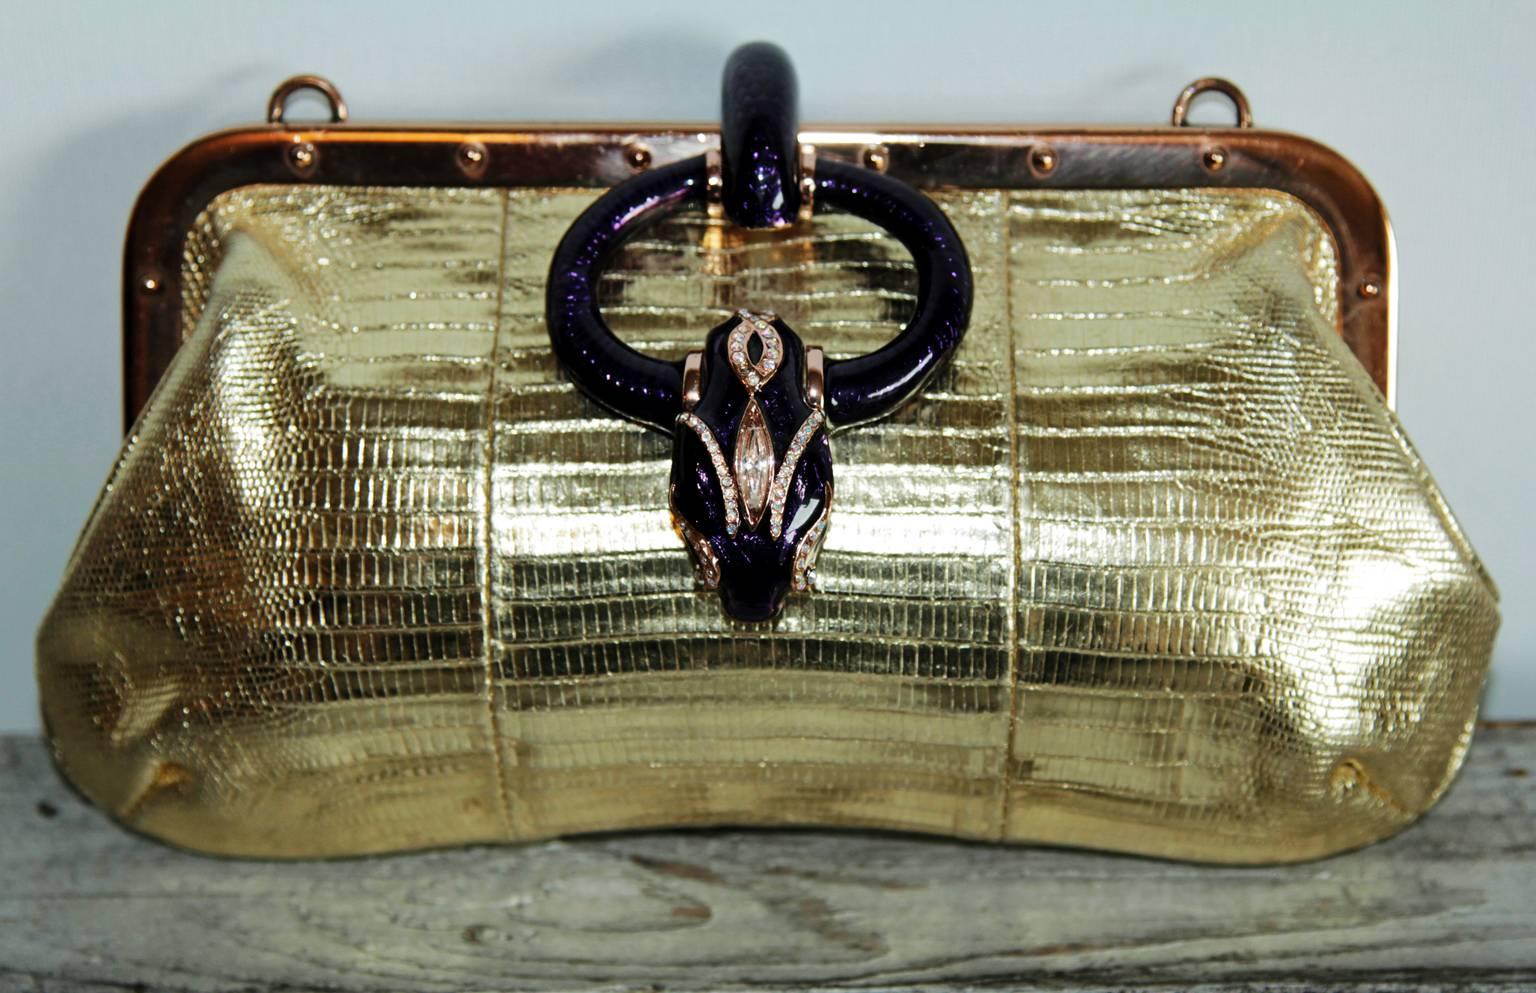 Iconic Tom Ford Gucci SS 2004 Python & Crystal Runway & Ad Campaign Bag!

So many of Tom Ford's incredible runway collections for Gucci & YSL will forever hold a place in fashion history, as well as in people's hearts, for the incredible gowns,